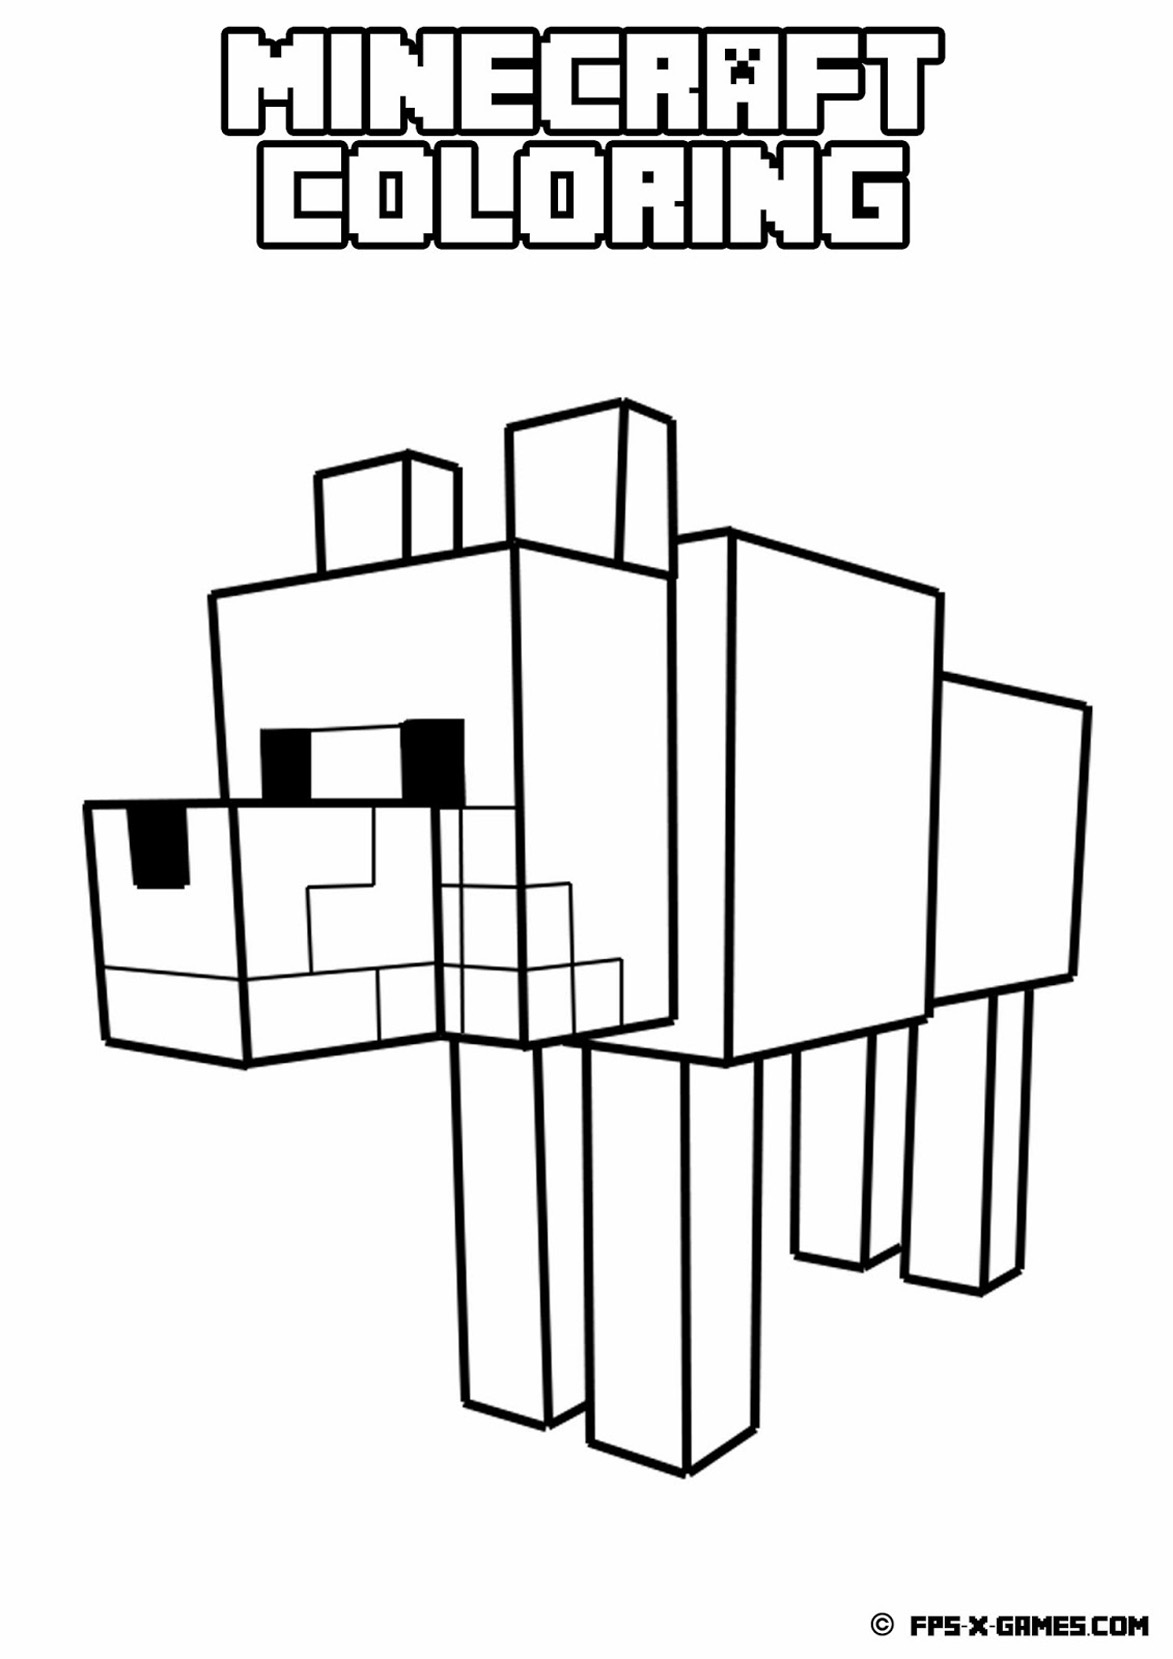 Coloring Pages : Drawing Inspired Minecraft Coloring For Kids To ...